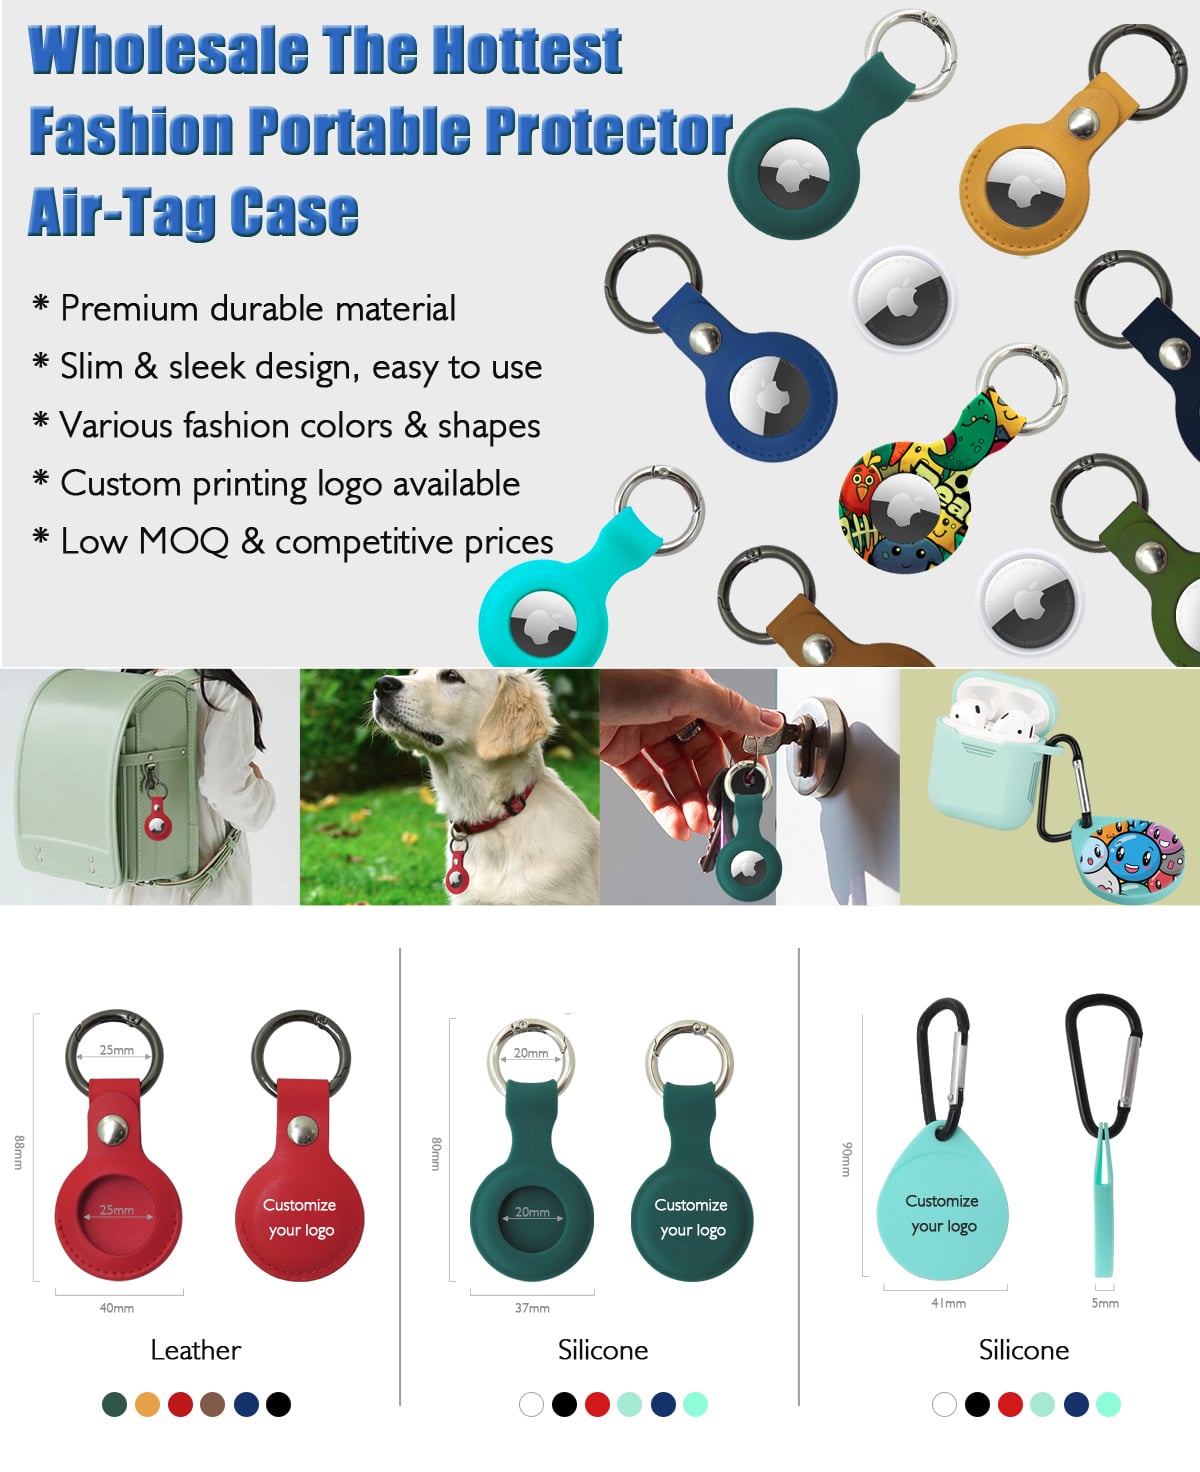 Wholesale The Hottest Fashion Portable Protector Air-Tag Case